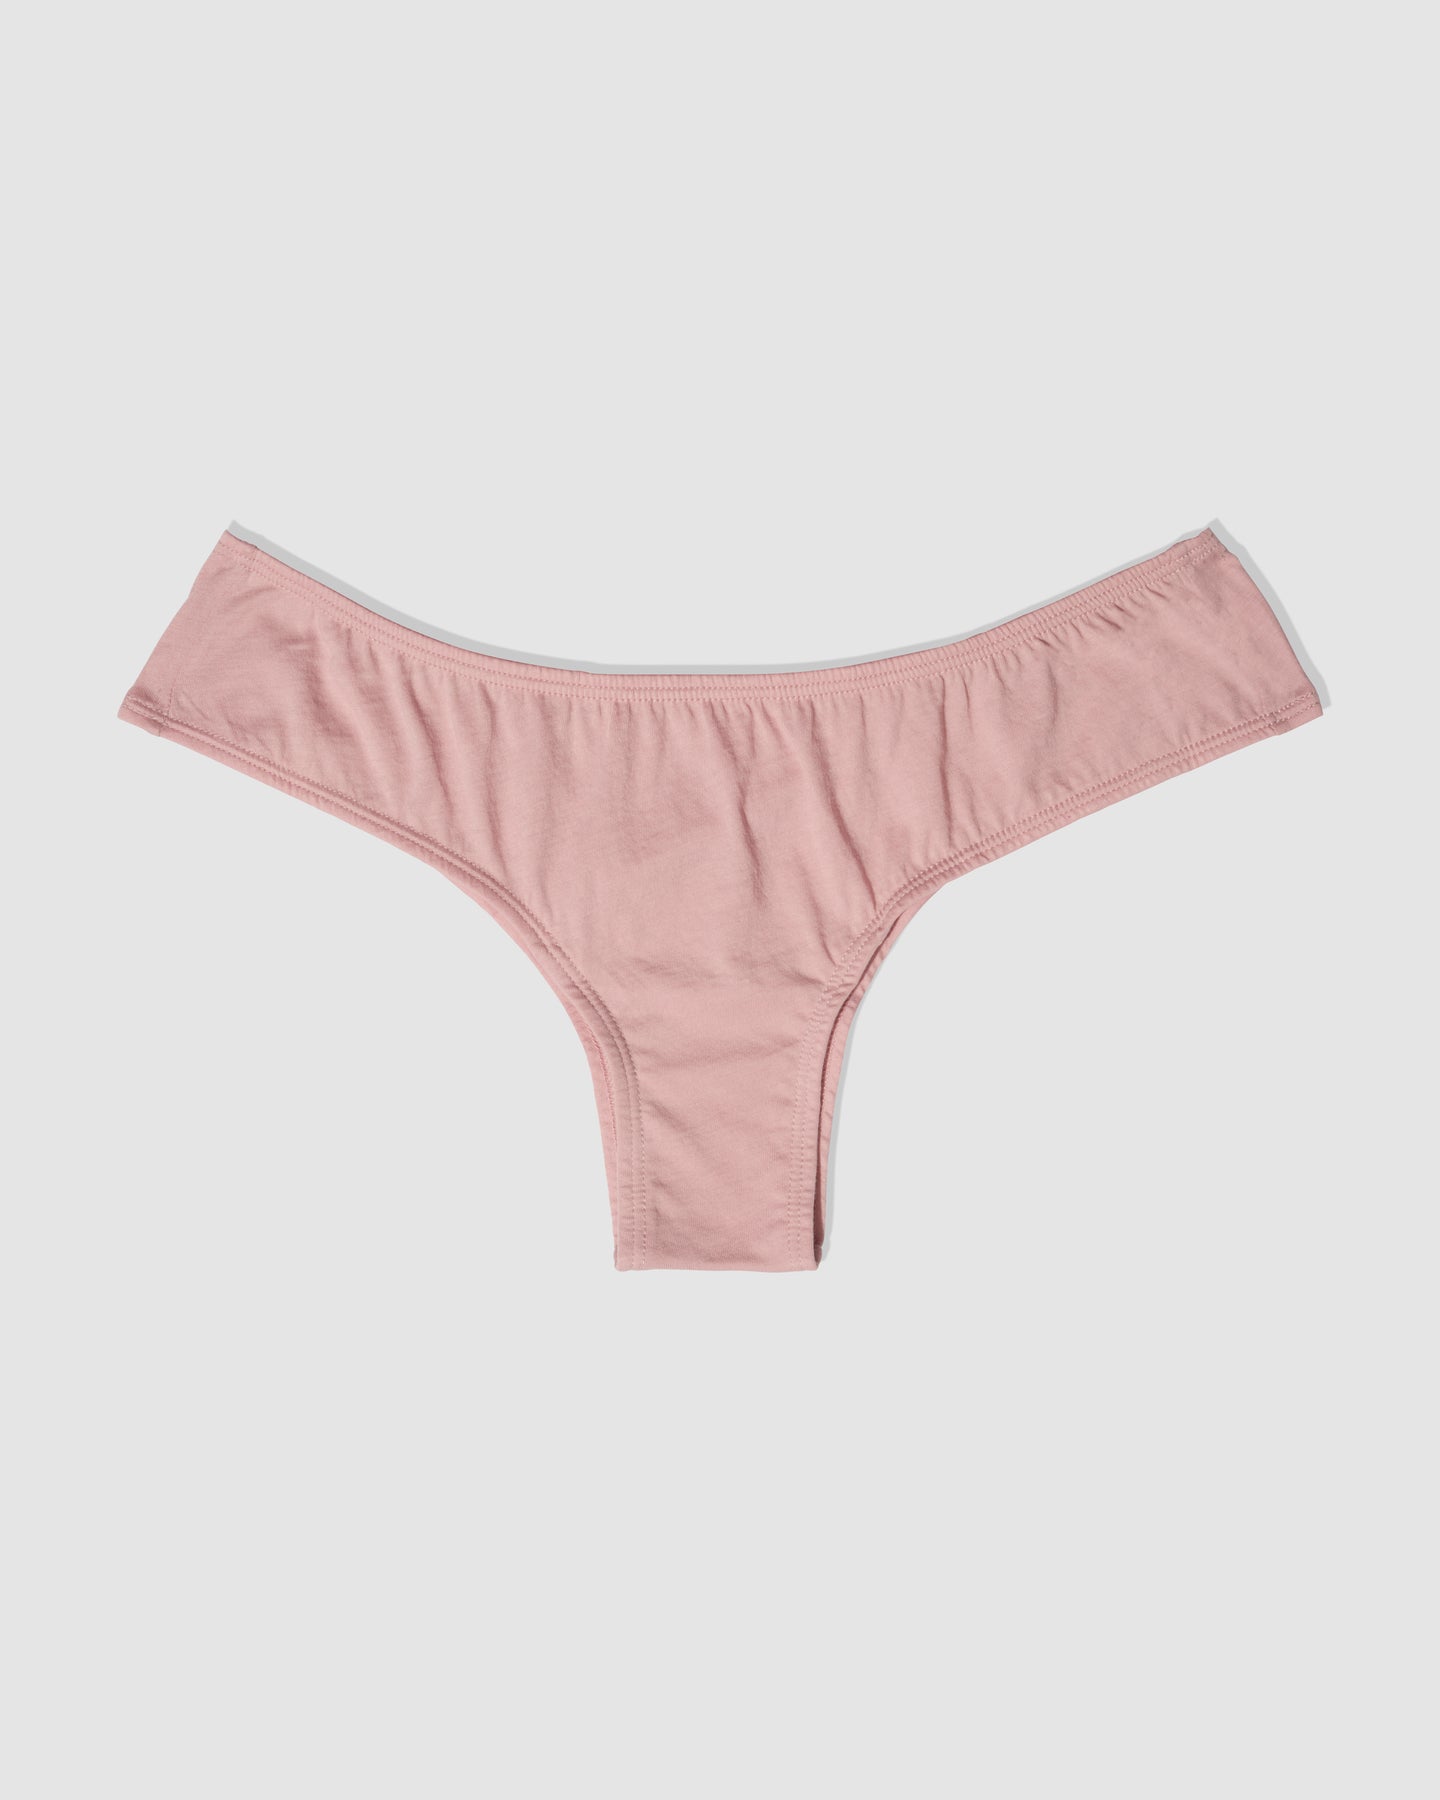 Stylish Cotton Hipster Panties Manufacturer in USA, Australia, Canada, UAE  and Europe